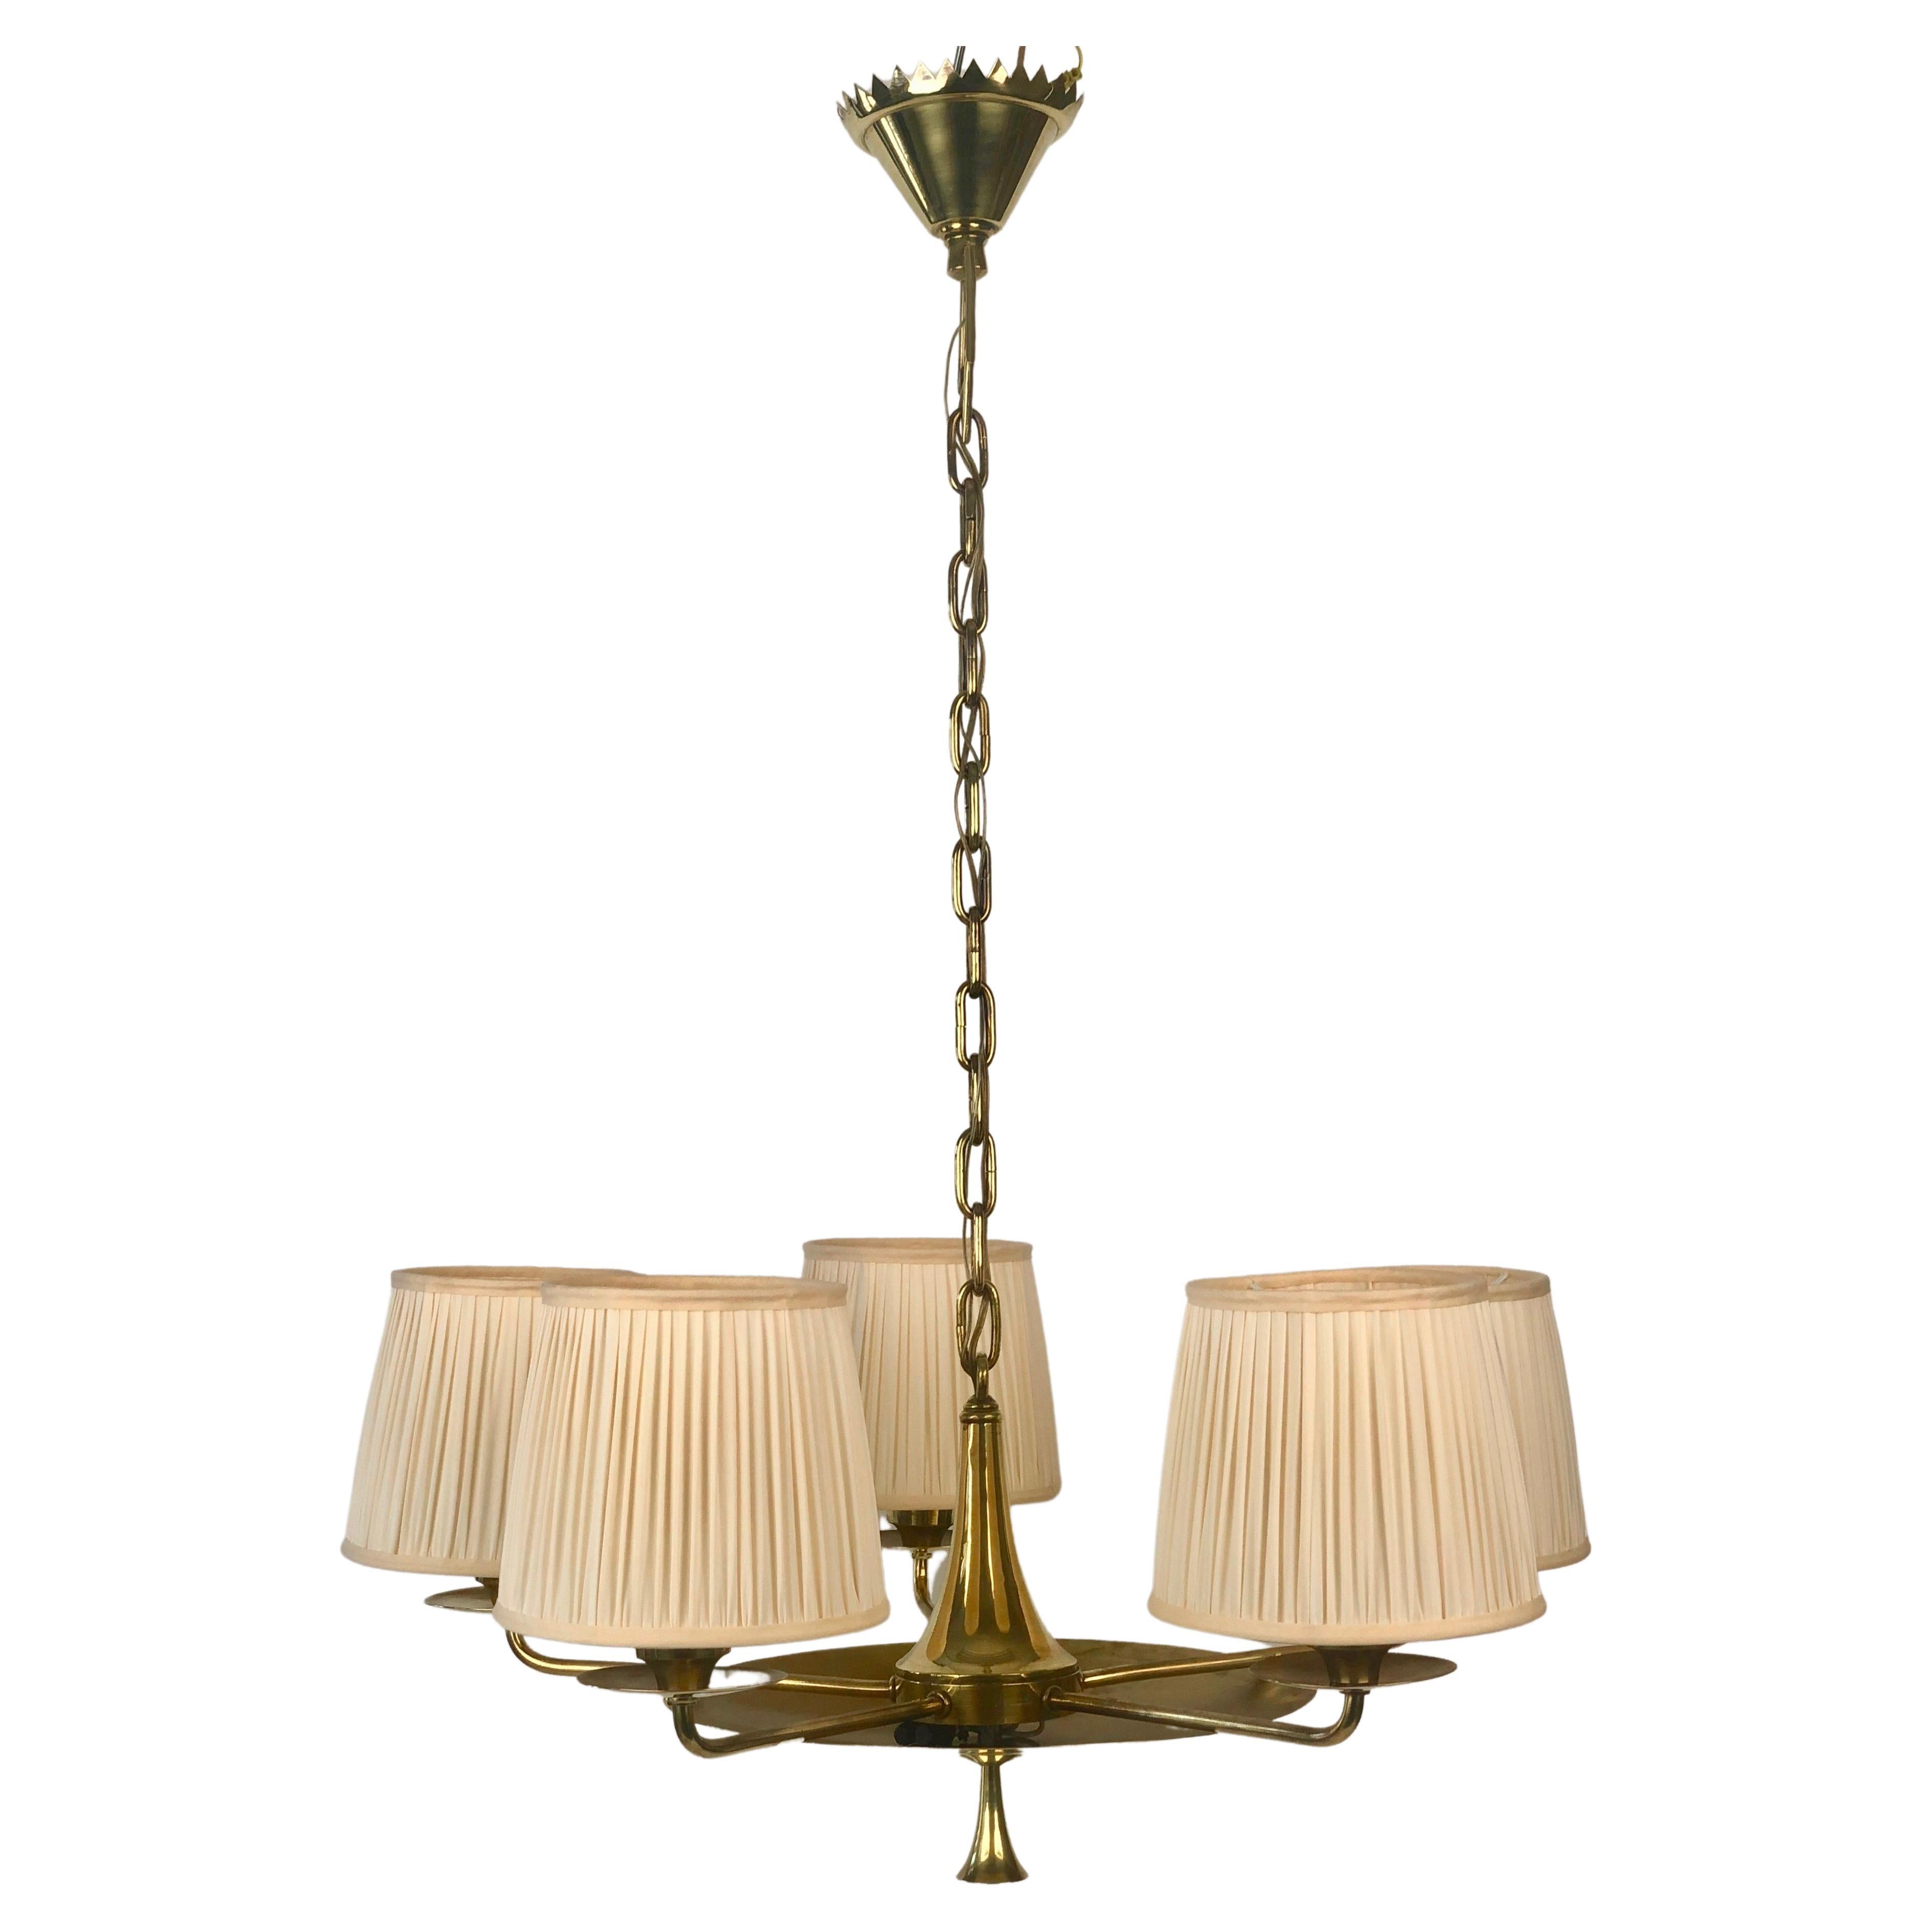 A beautiful five arm chandelier in brass from the 1920's. 

Designed and manufactured in Austria, as usual the quality is very high with wonderful craftsmanship. Please take time to look at the photos. You will discover an unusual canopy with a